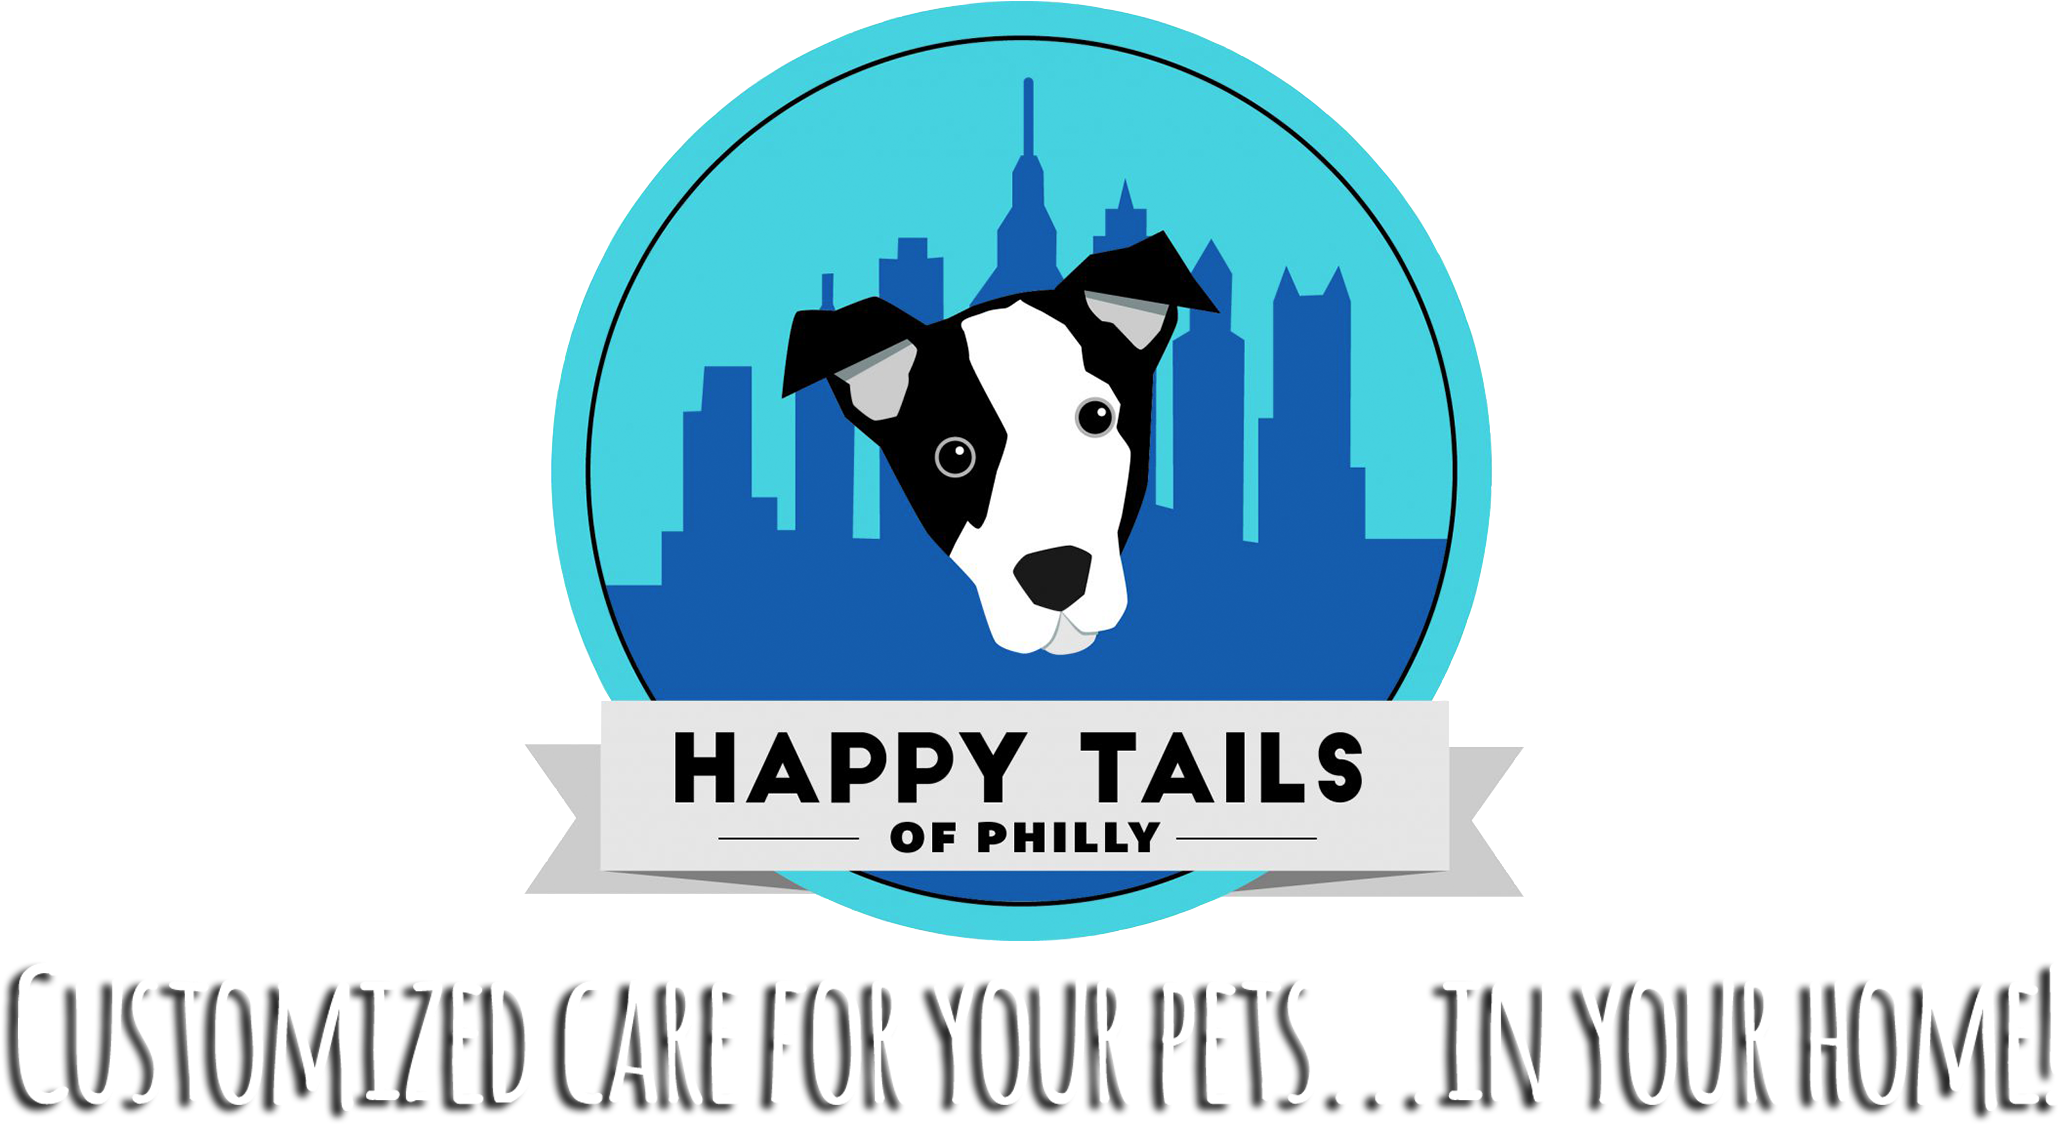 Happy Tails Of Philly - Companion Dog (2256x1174)